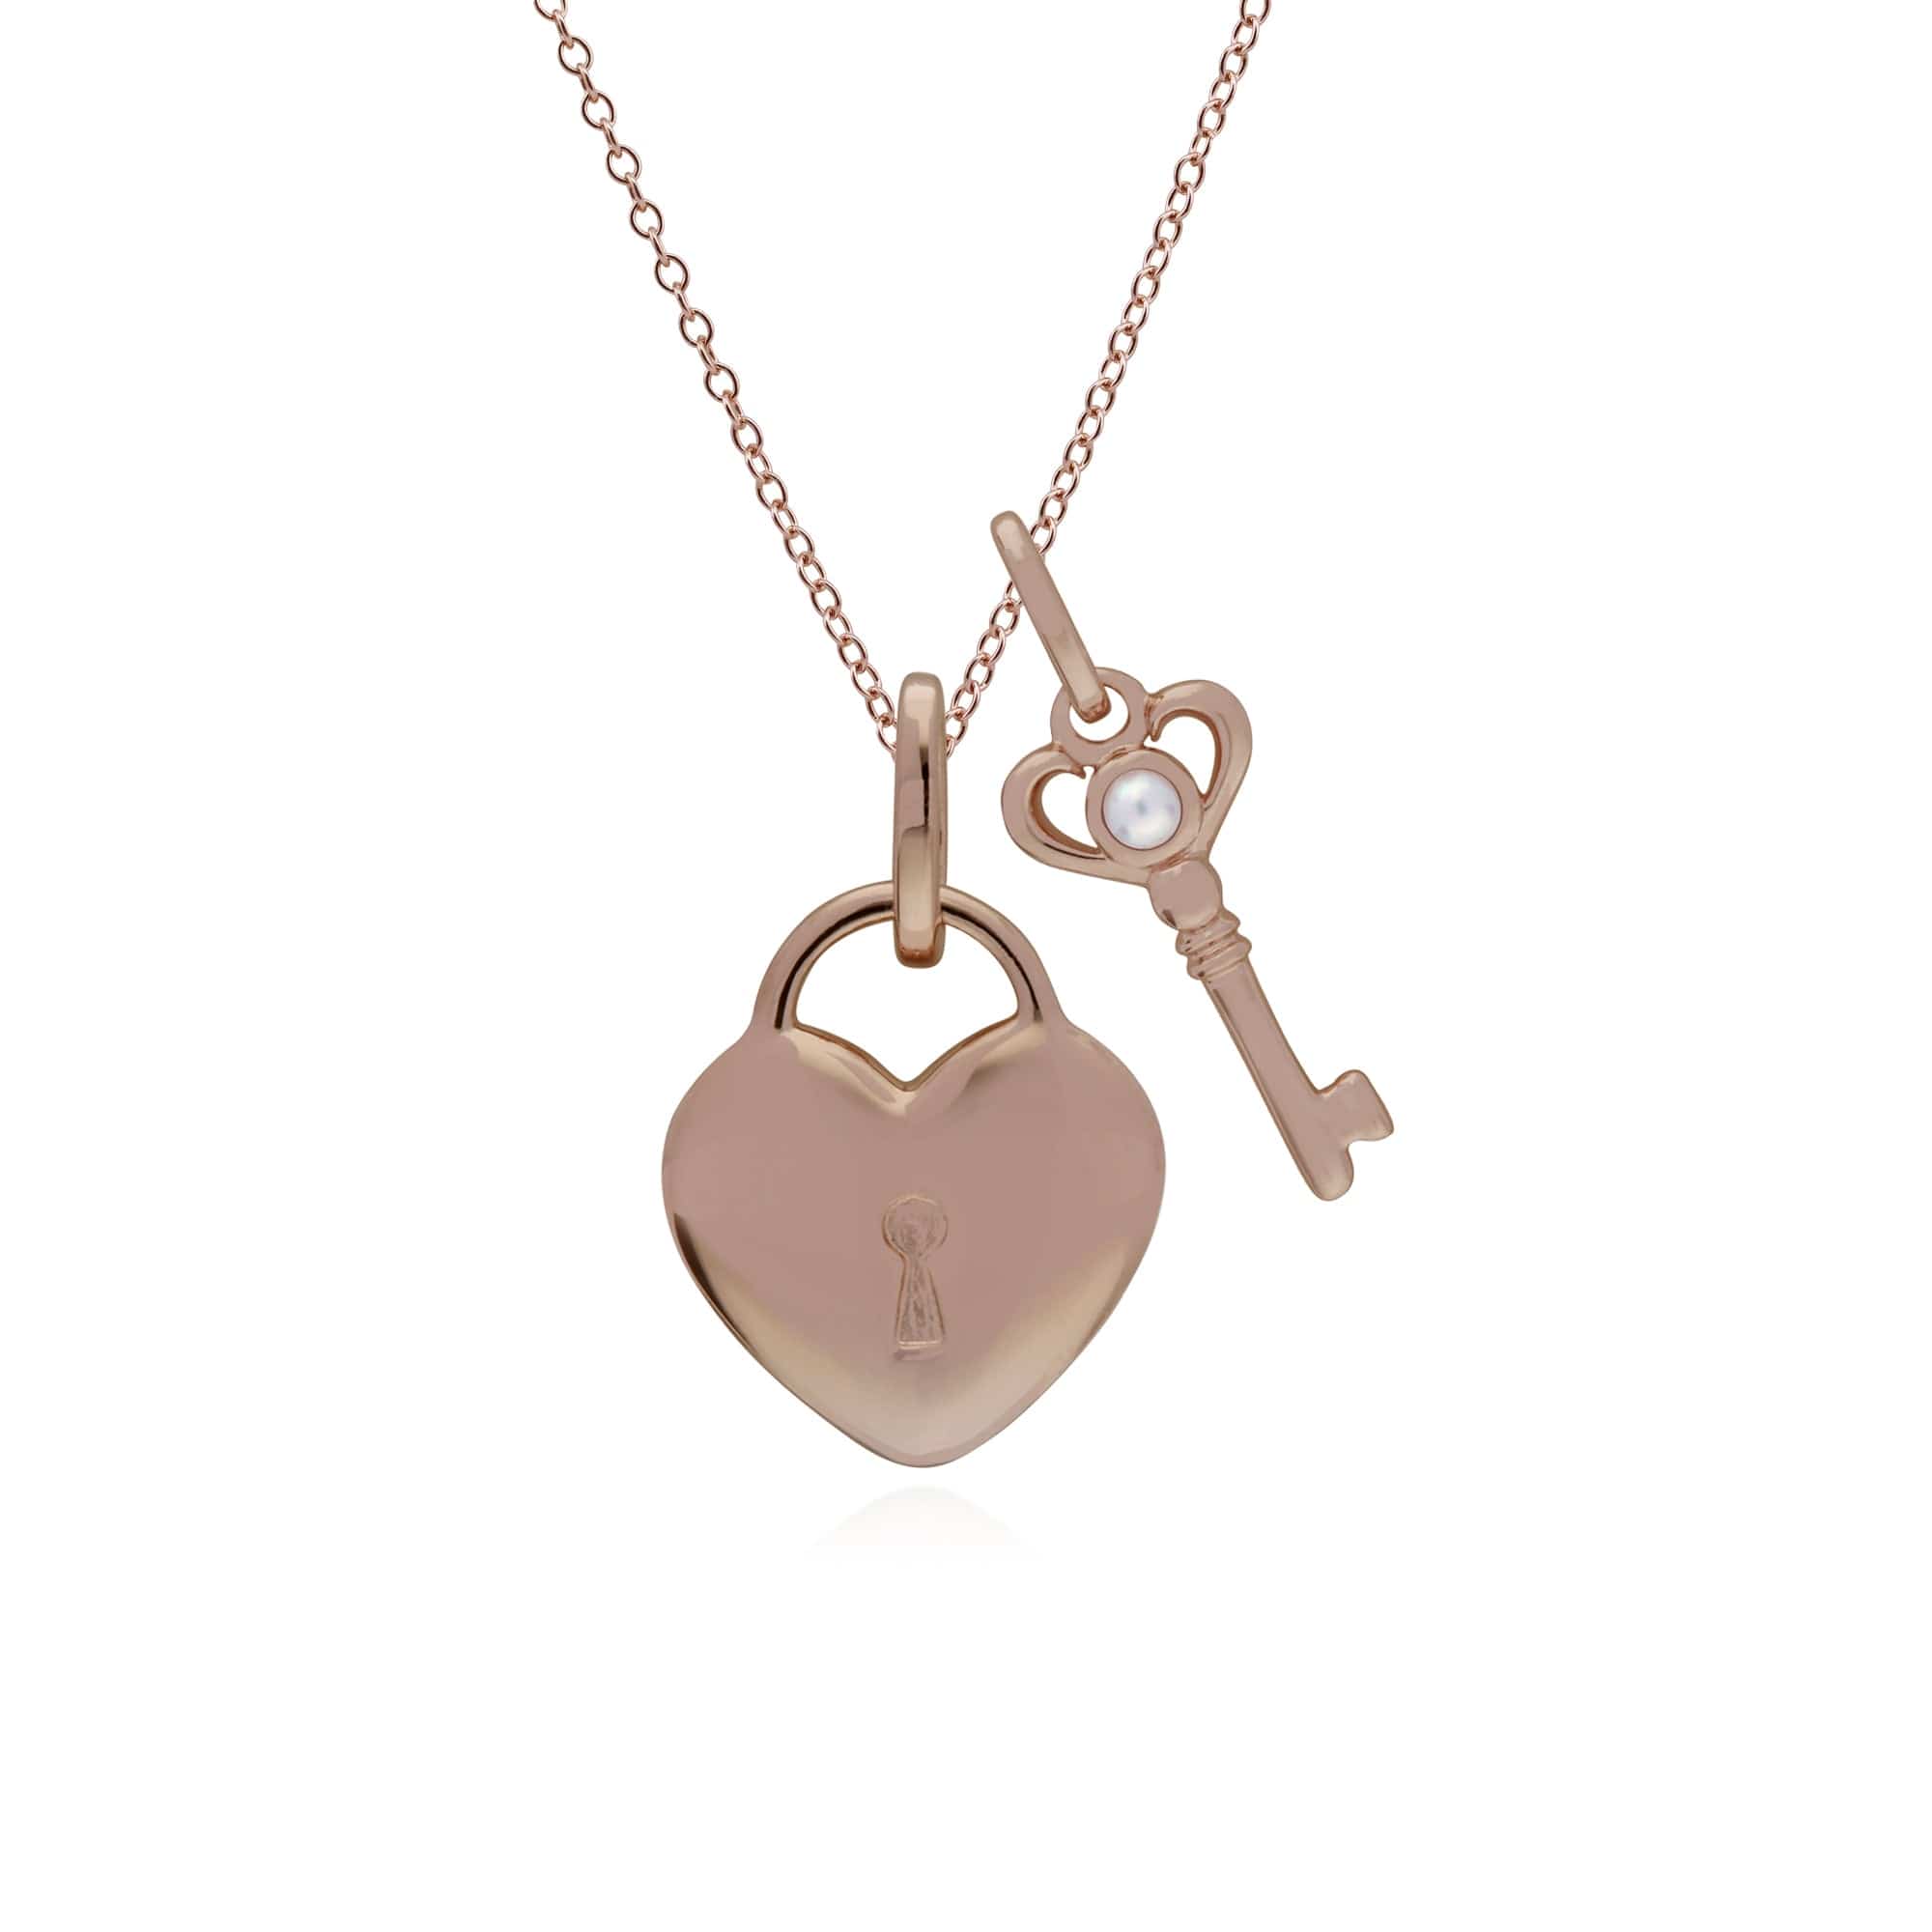 270P027101925-270P026901925 Classic Heart Lock Pendant & Pearl Key Charm in Rose Gold Plated 925 Sterling Silver 1